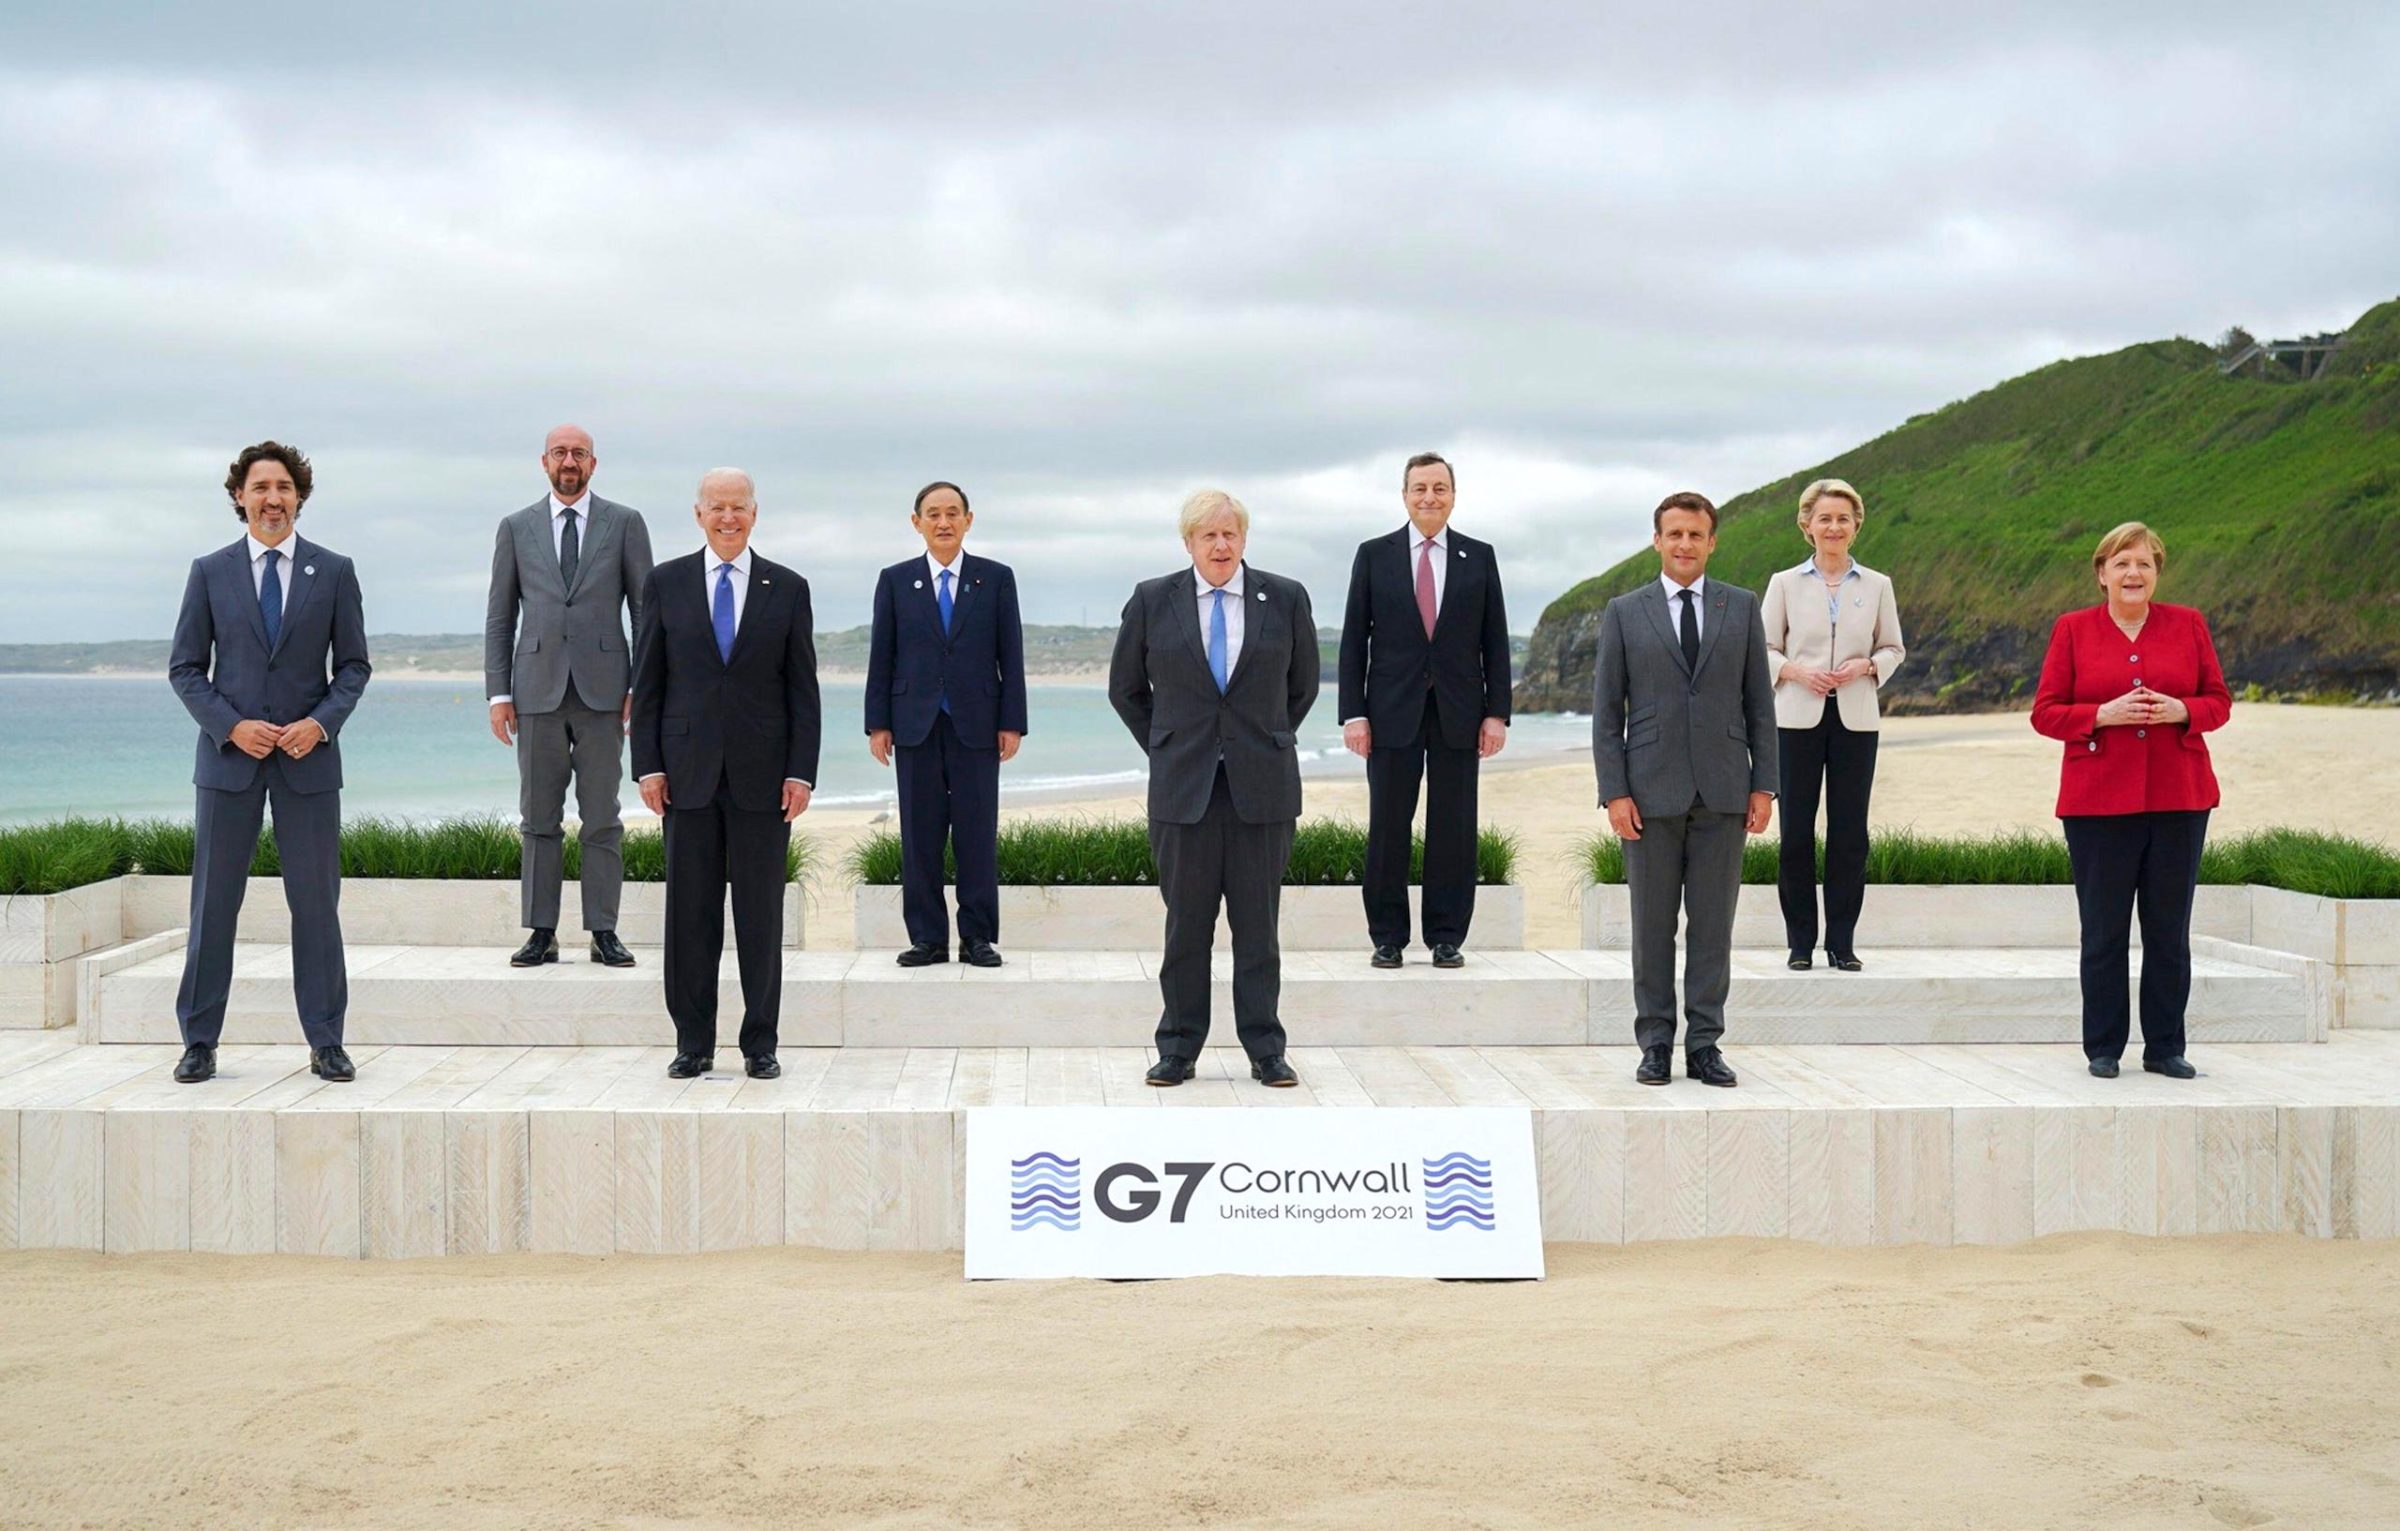 G7 heads of state at the recent summit in Cornwall, UK (Image: Alamy)